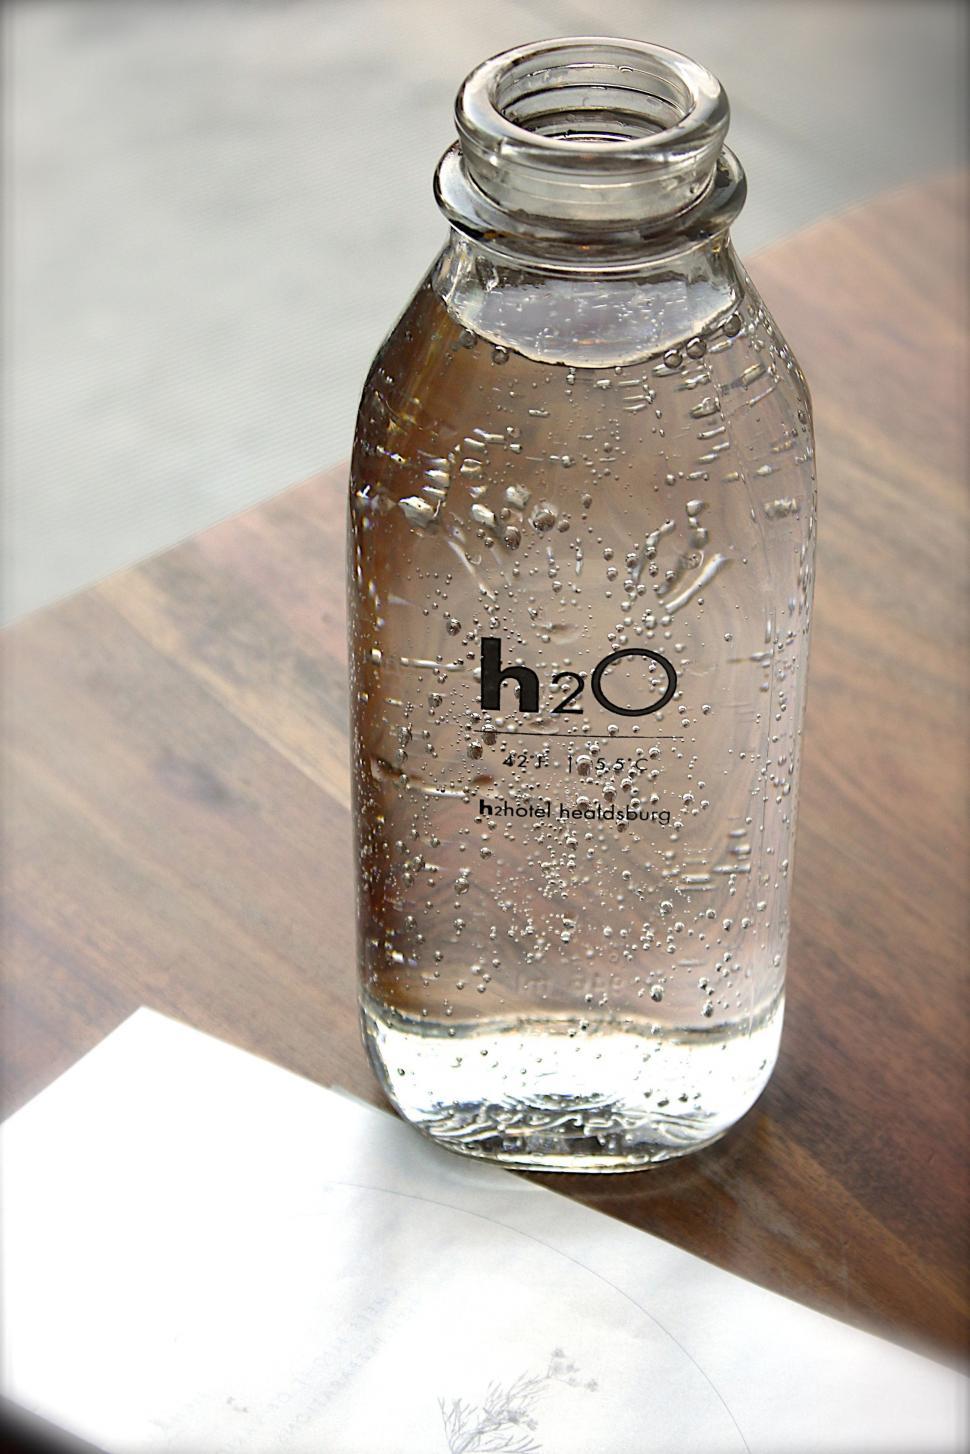 Free Image of h2O Water Bottle on Wooden Table  